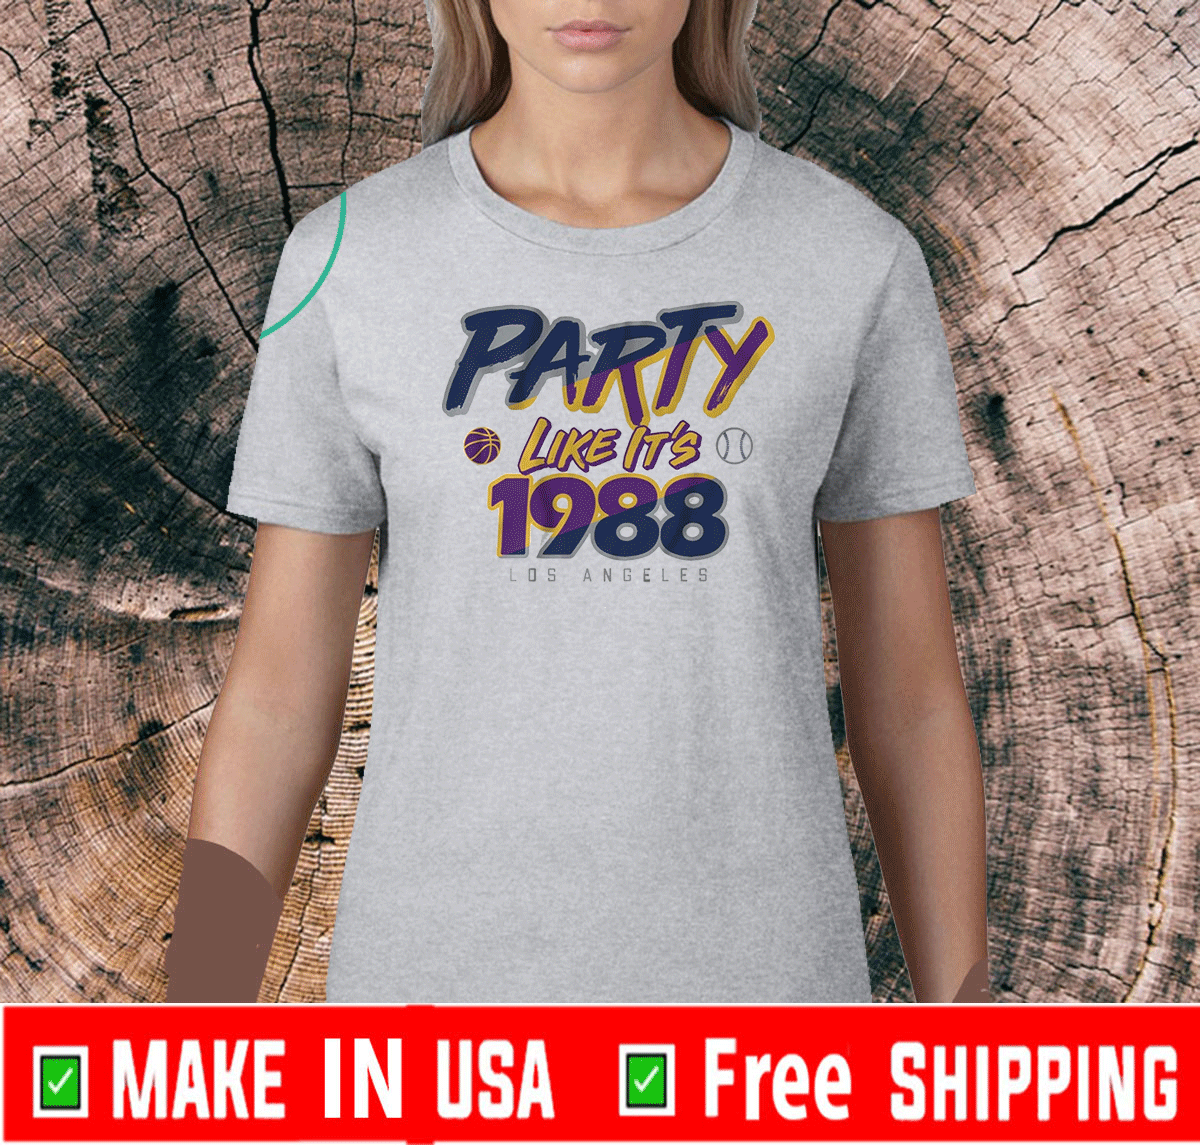 PARTY LIKE IT'S 1988 LOS ANGELES SHIRT